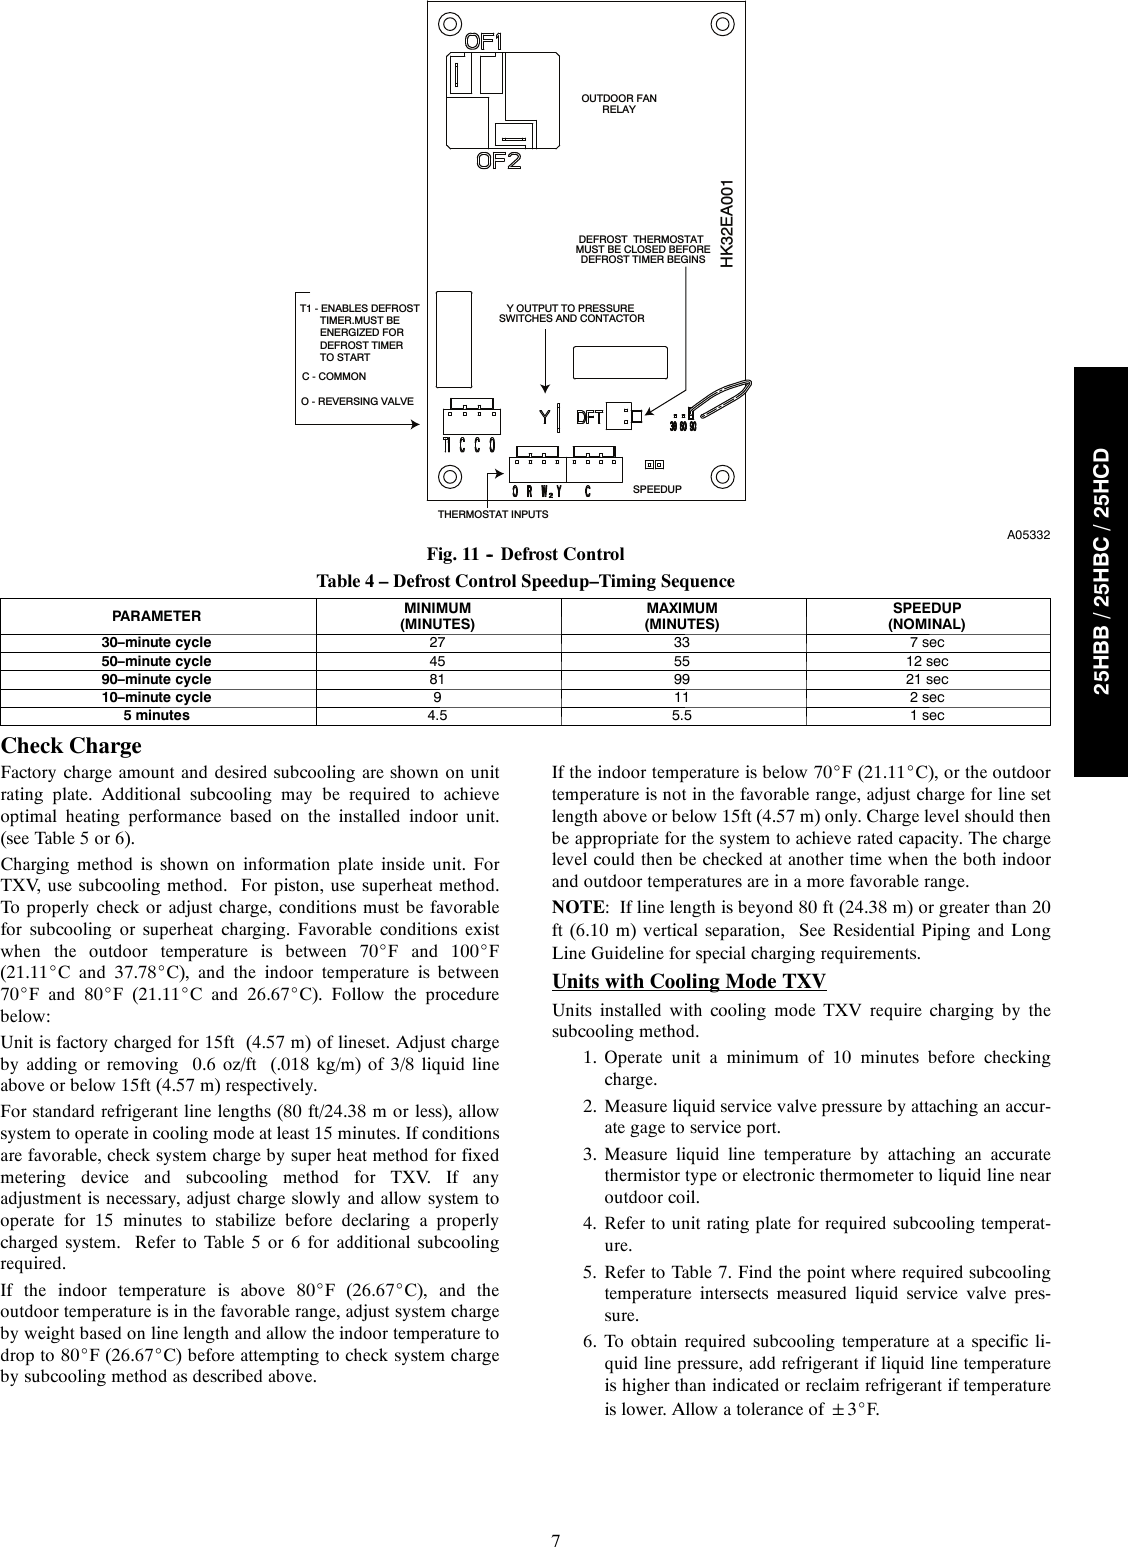 Page 7 of 12 - Carrier Carrier-25Hcd-Quick-Start-Guide 25HBB-C-HCD-03SI